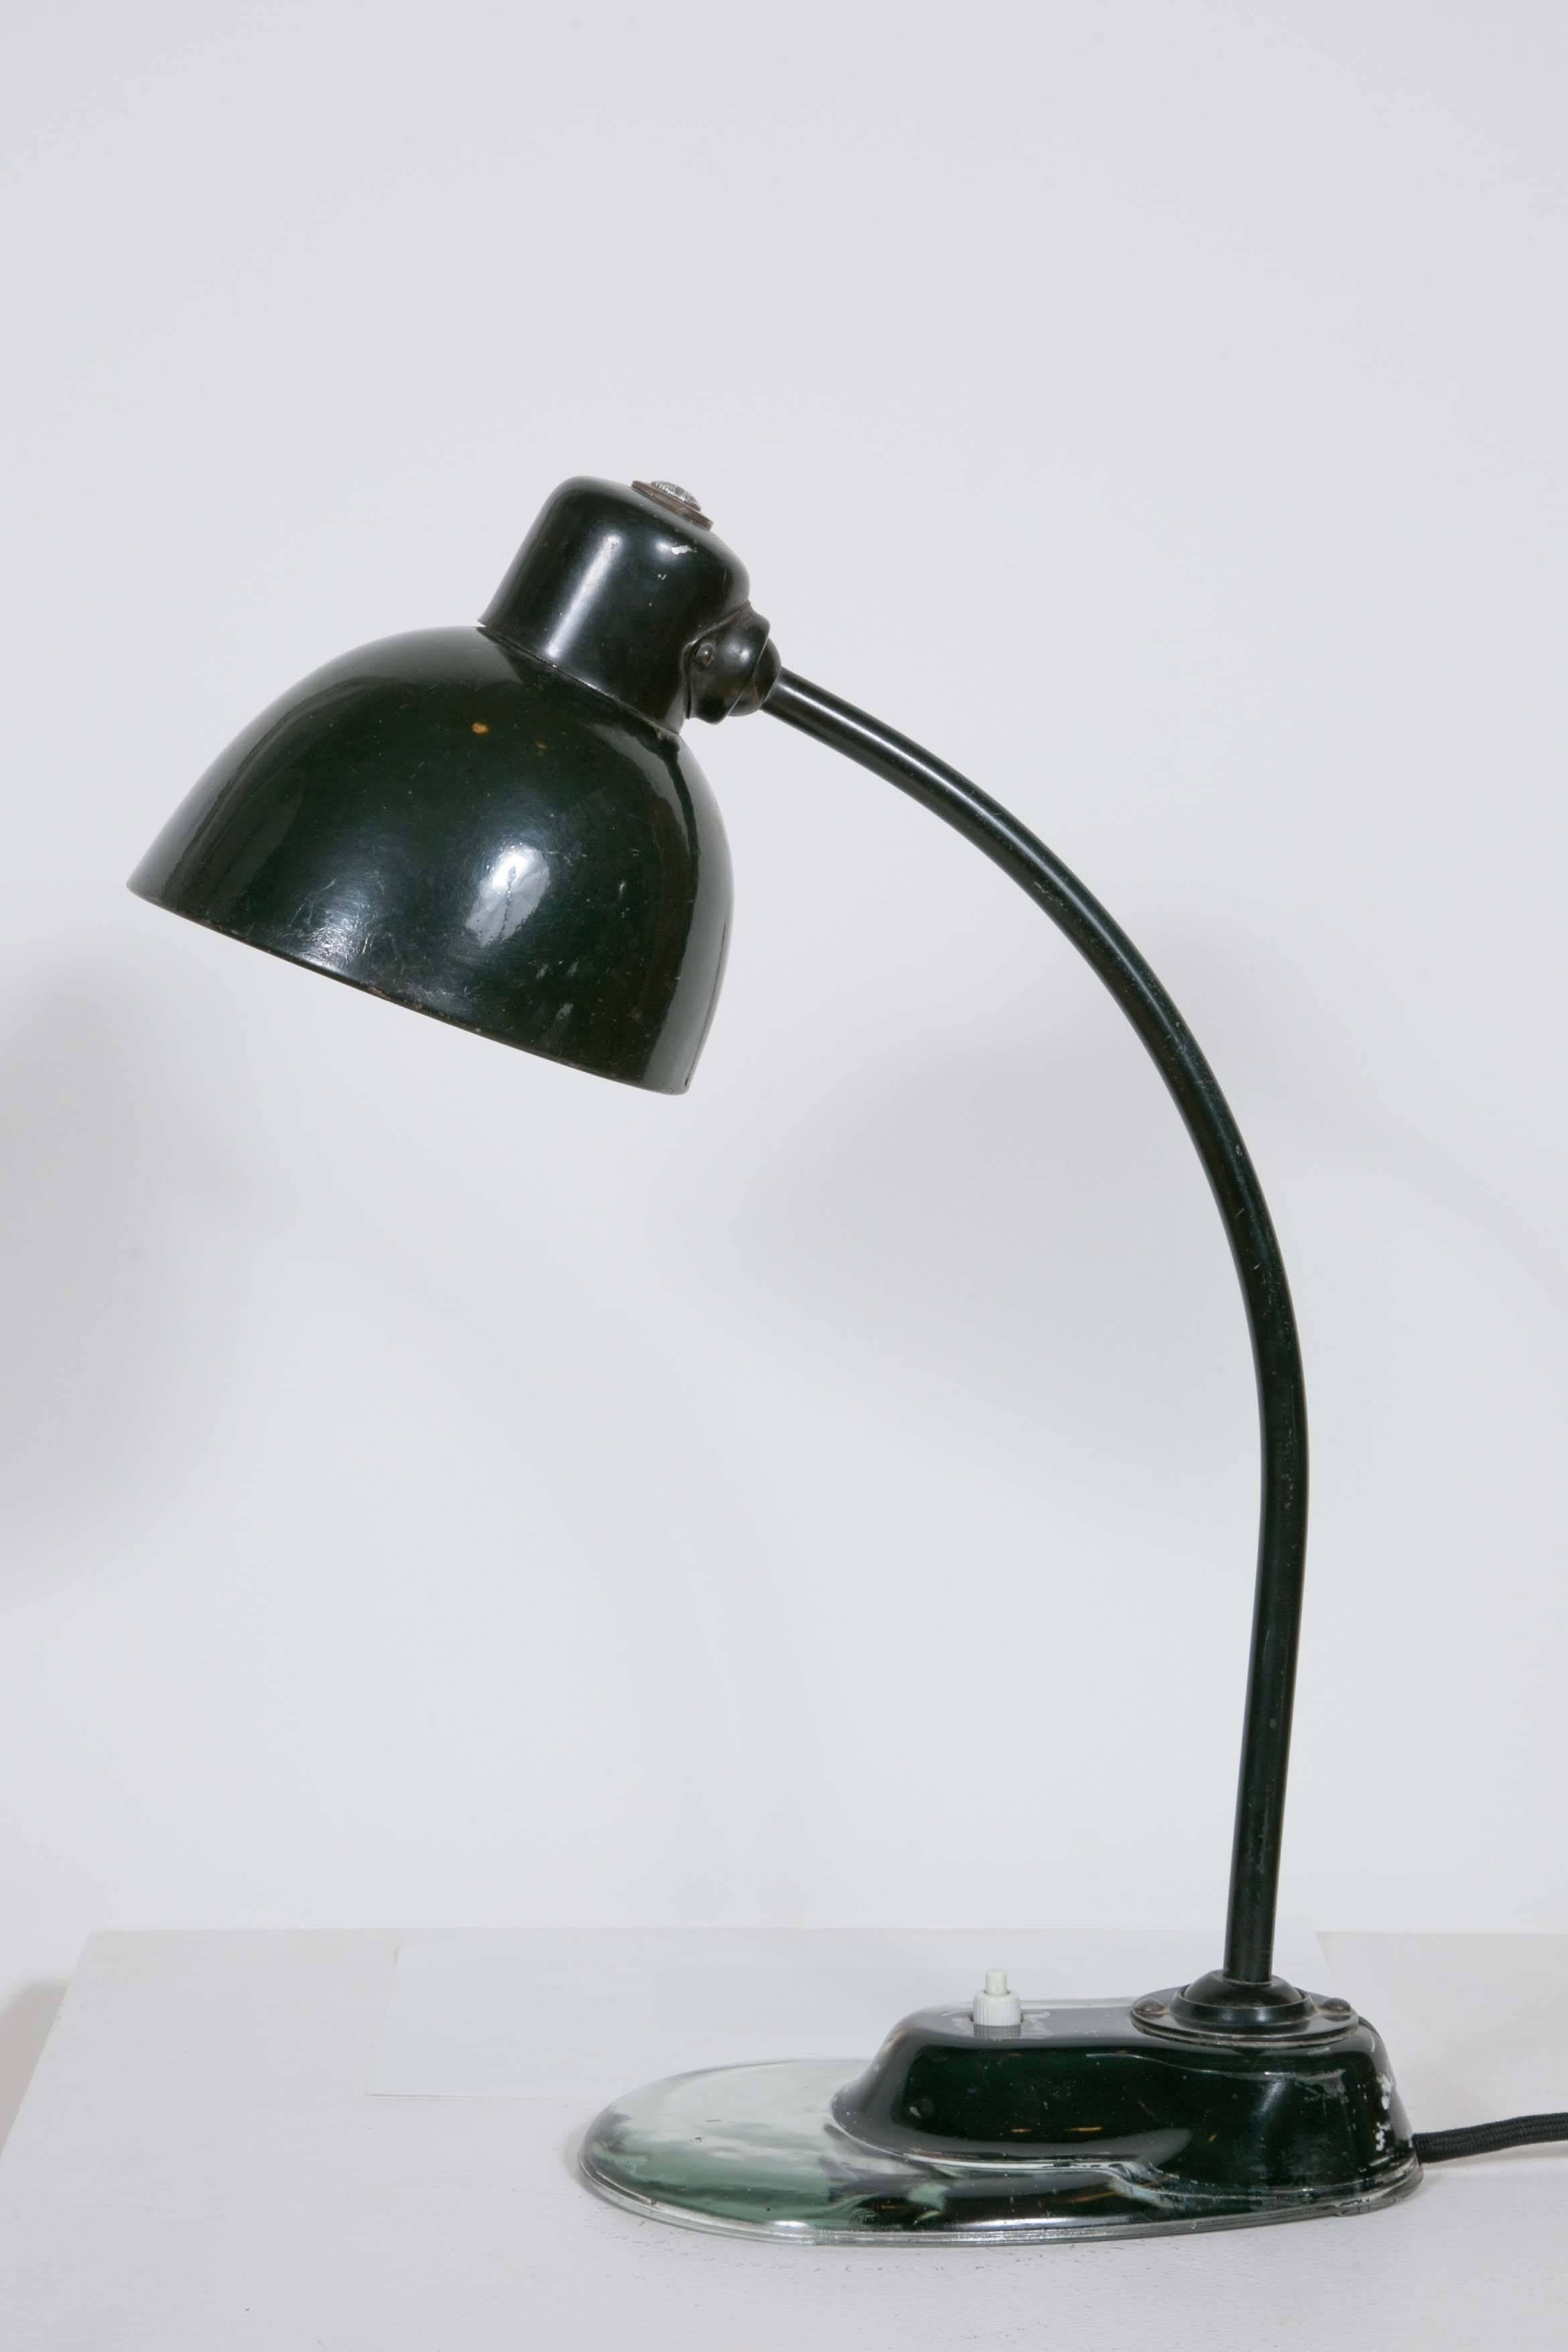 Emblematic Bauhaus desk lamp designed by Marianne Brandt and manufactured by Kandem. It has the typical glass base which makes this model the much sought after one. Original black paint. 
Fully functional.
Wired for European use.

Marianne